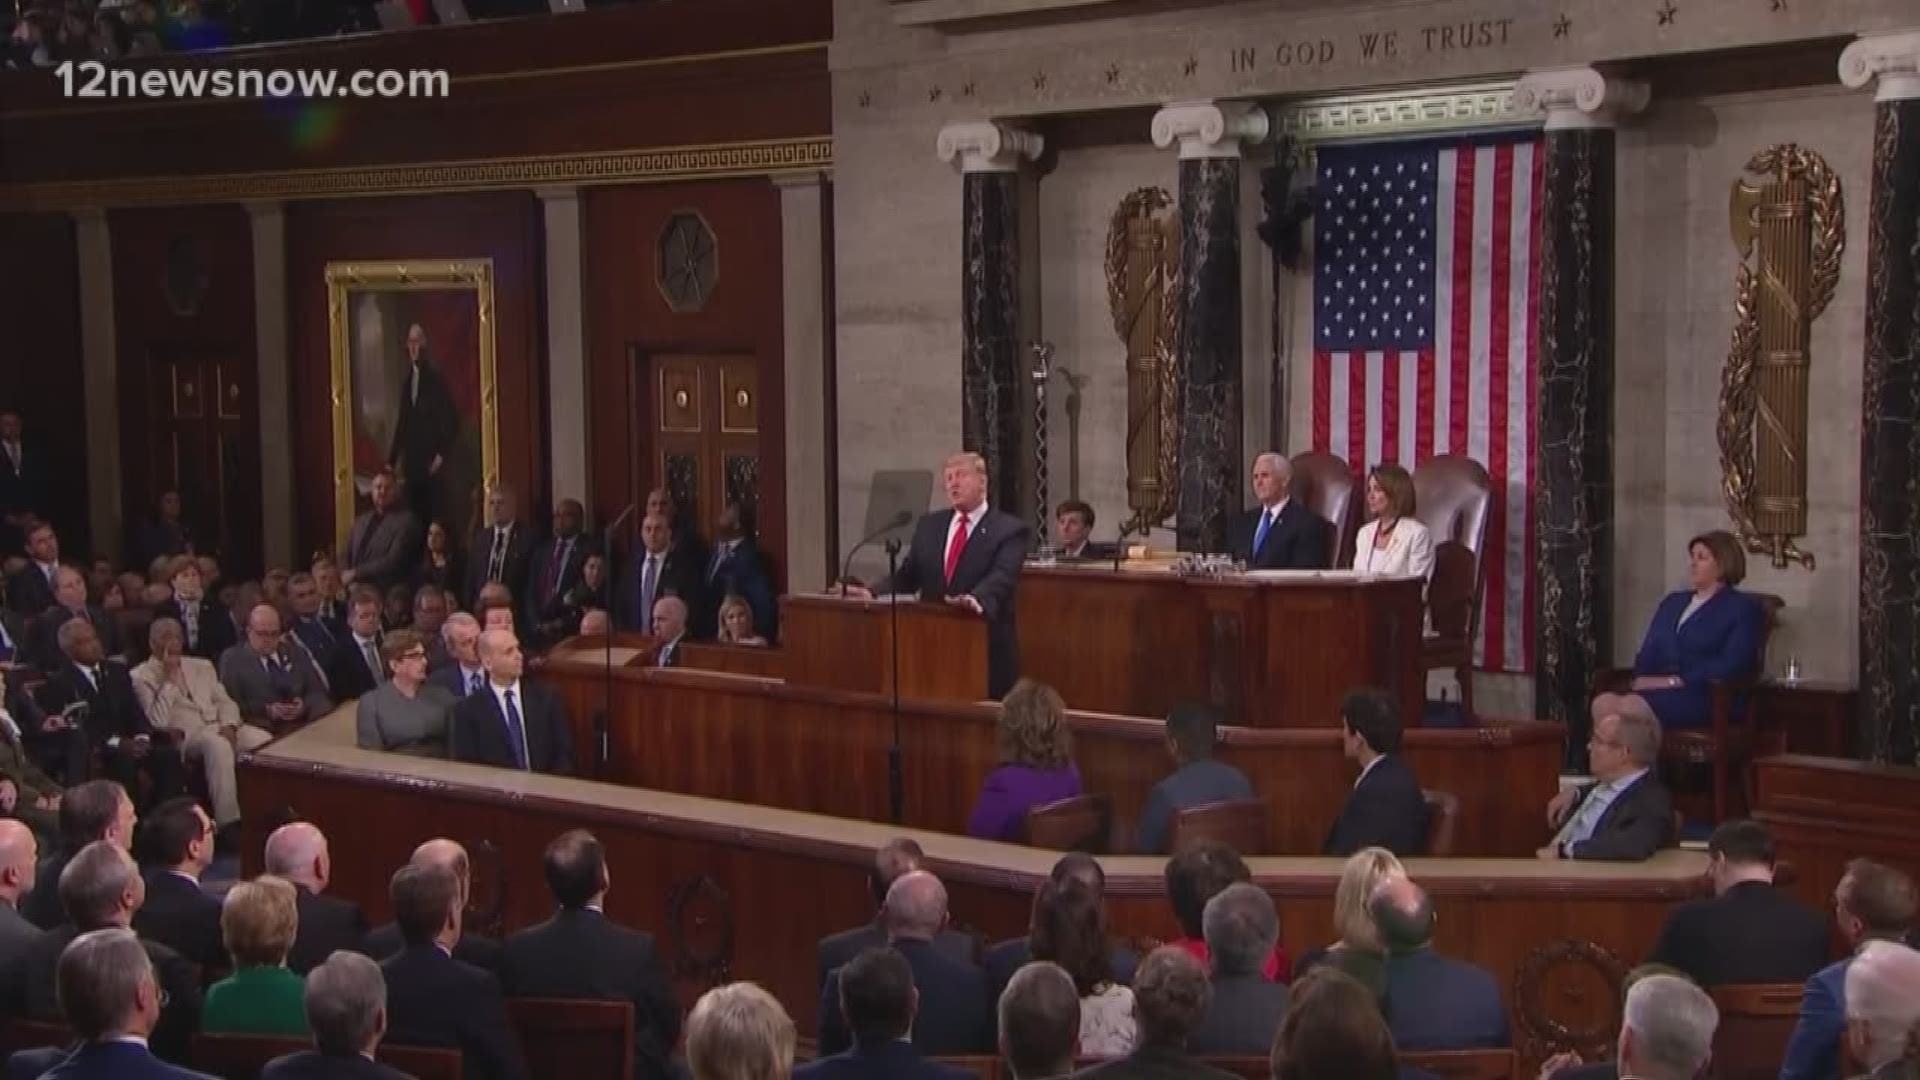 President Trump delivers the third longest State of the Union Address in history, where he calls for unity between parties, the summit with North Korea, and the need for the border wall.